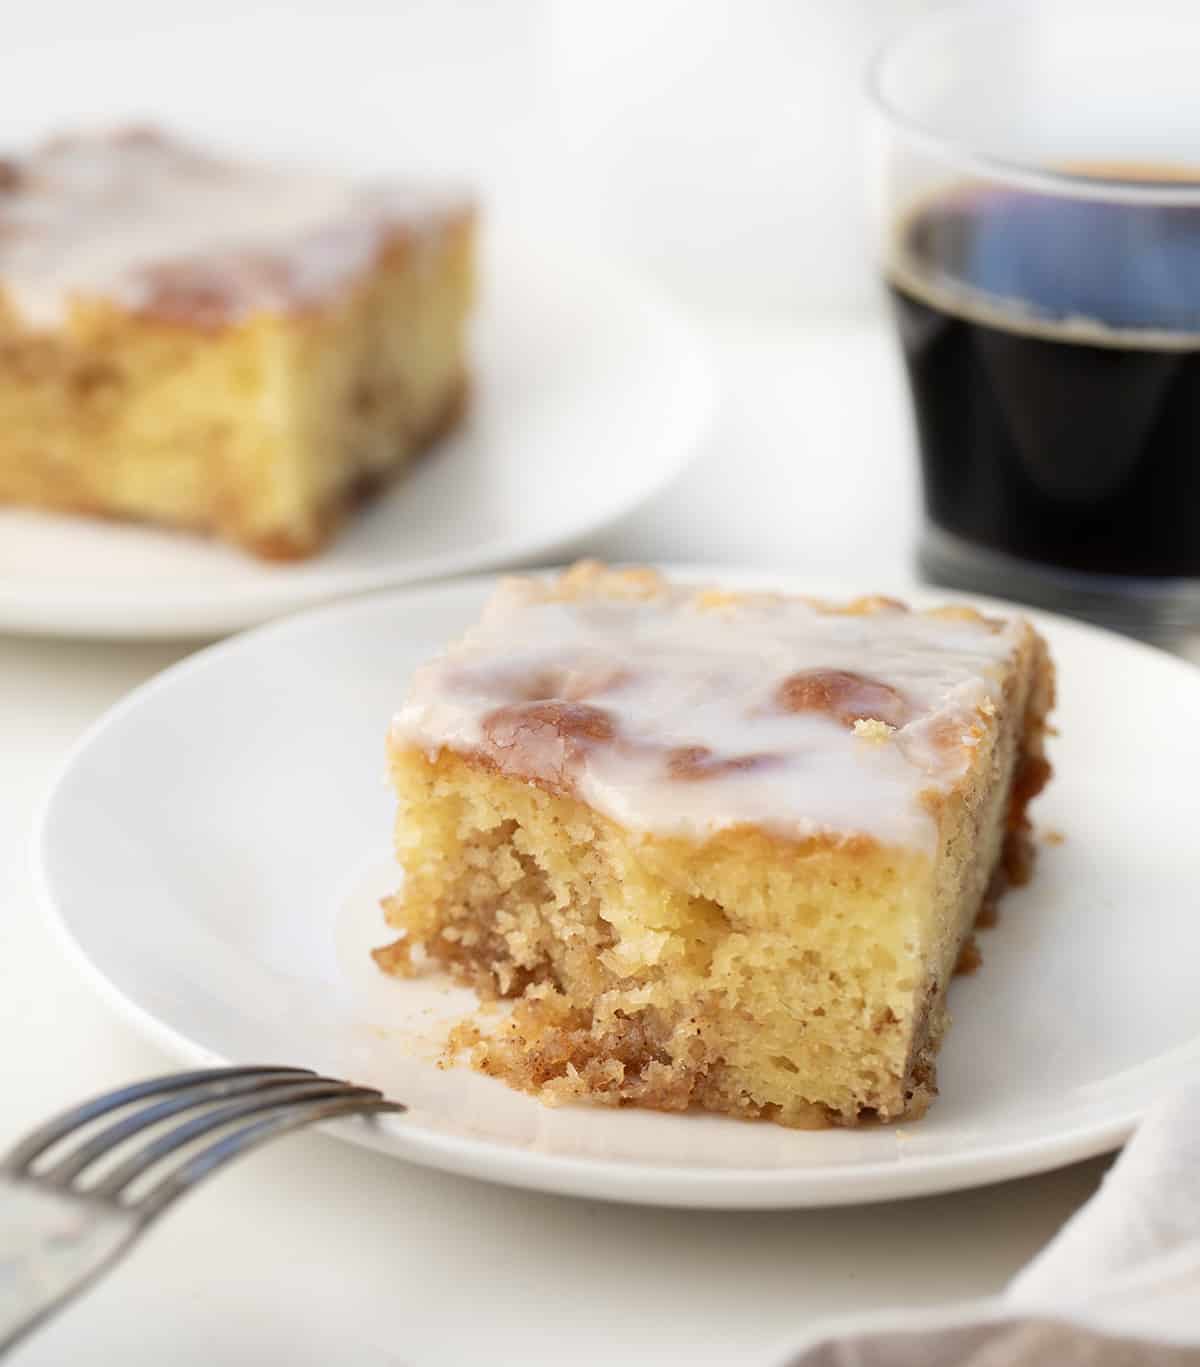 Piece of Honey Bun Cake on a white plate with a bite removed.